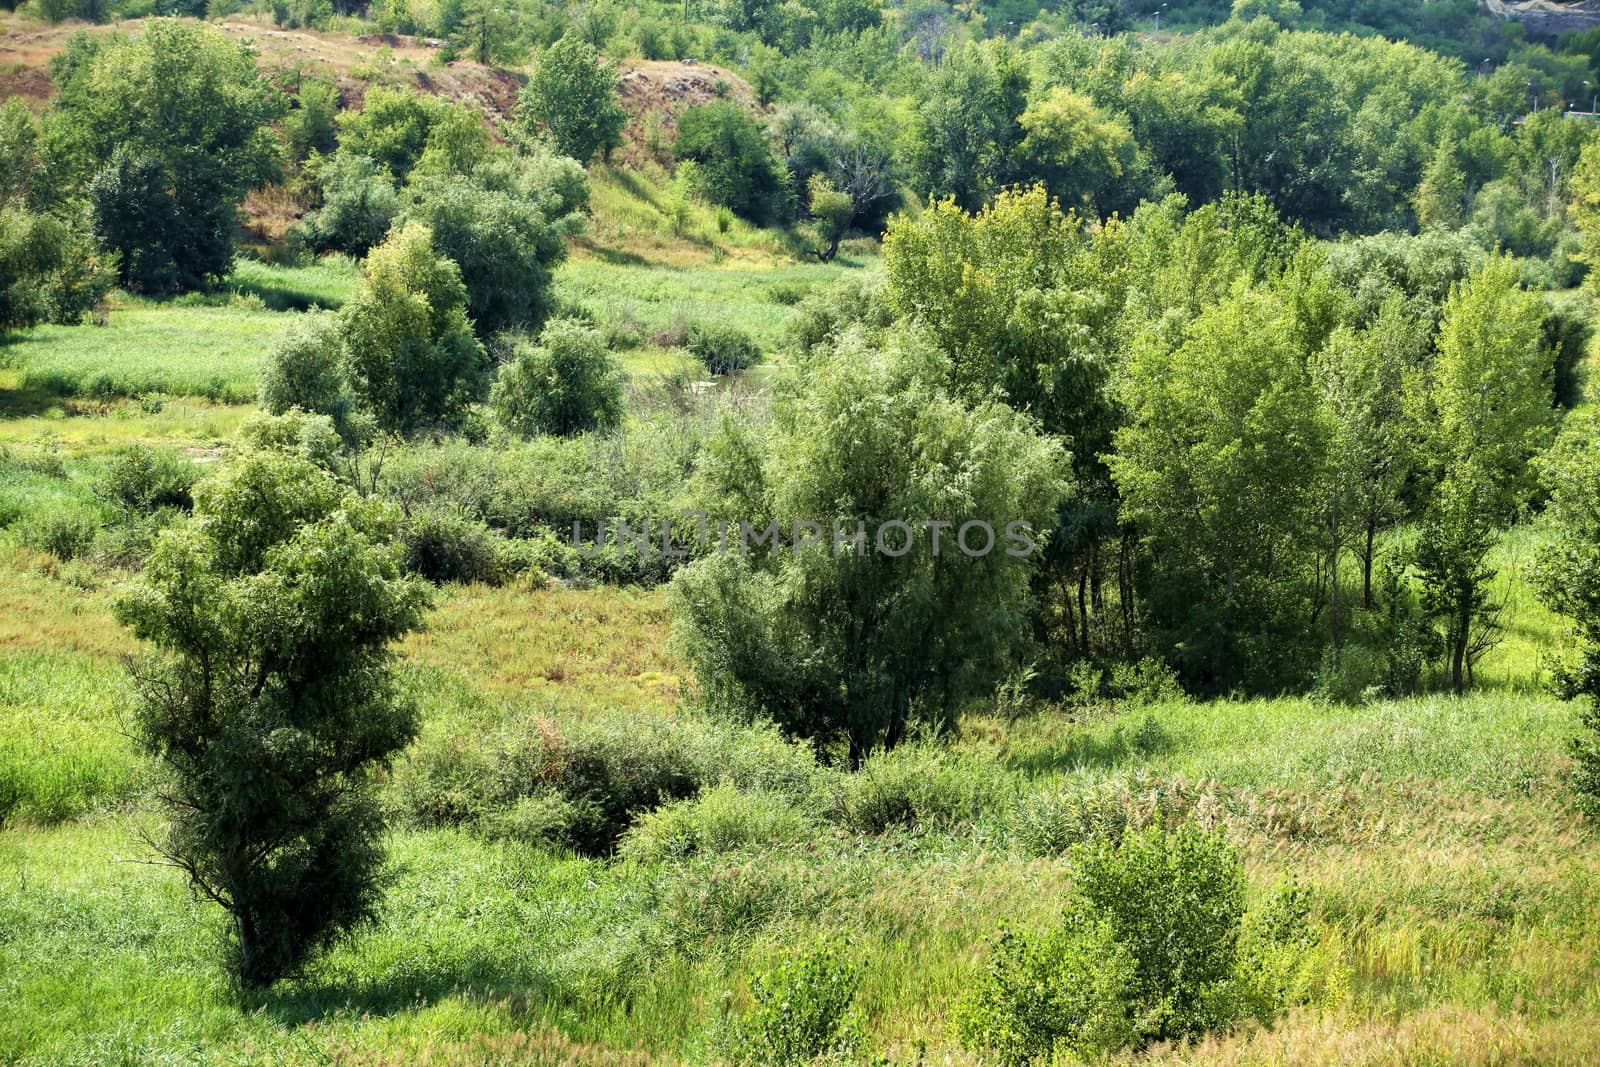 hilly scenic landscape tree and wild grasses 